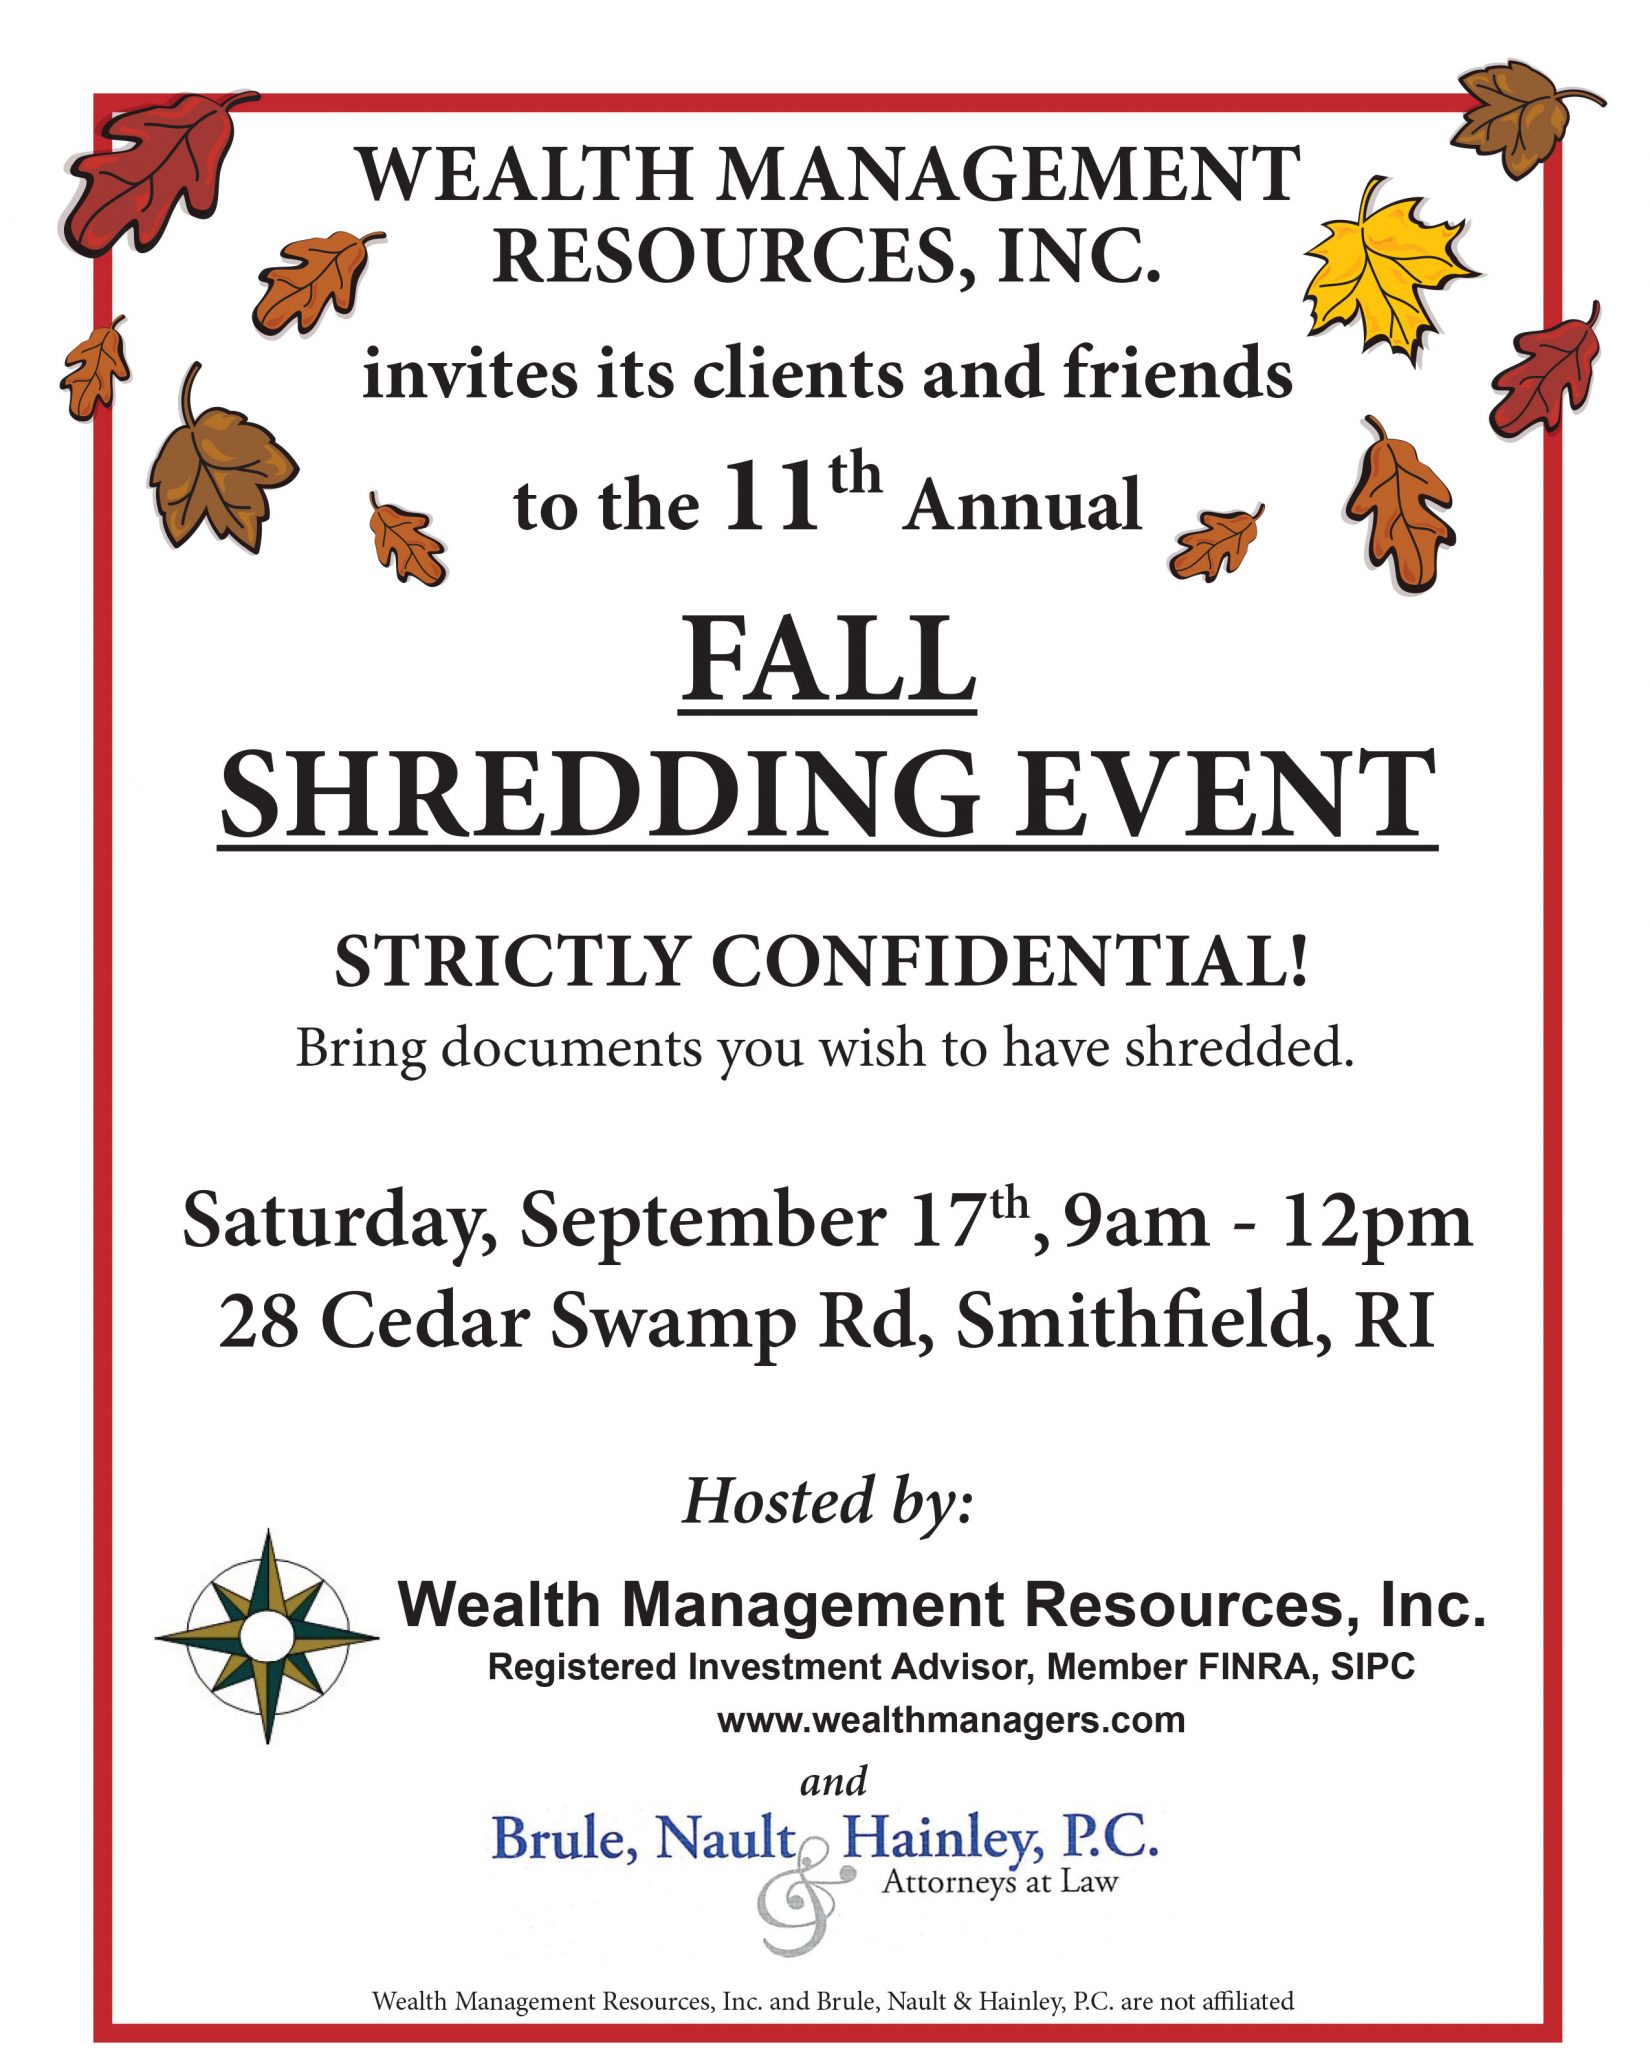 The 11th Annual Fall Shredding Event Wealth Management Resources